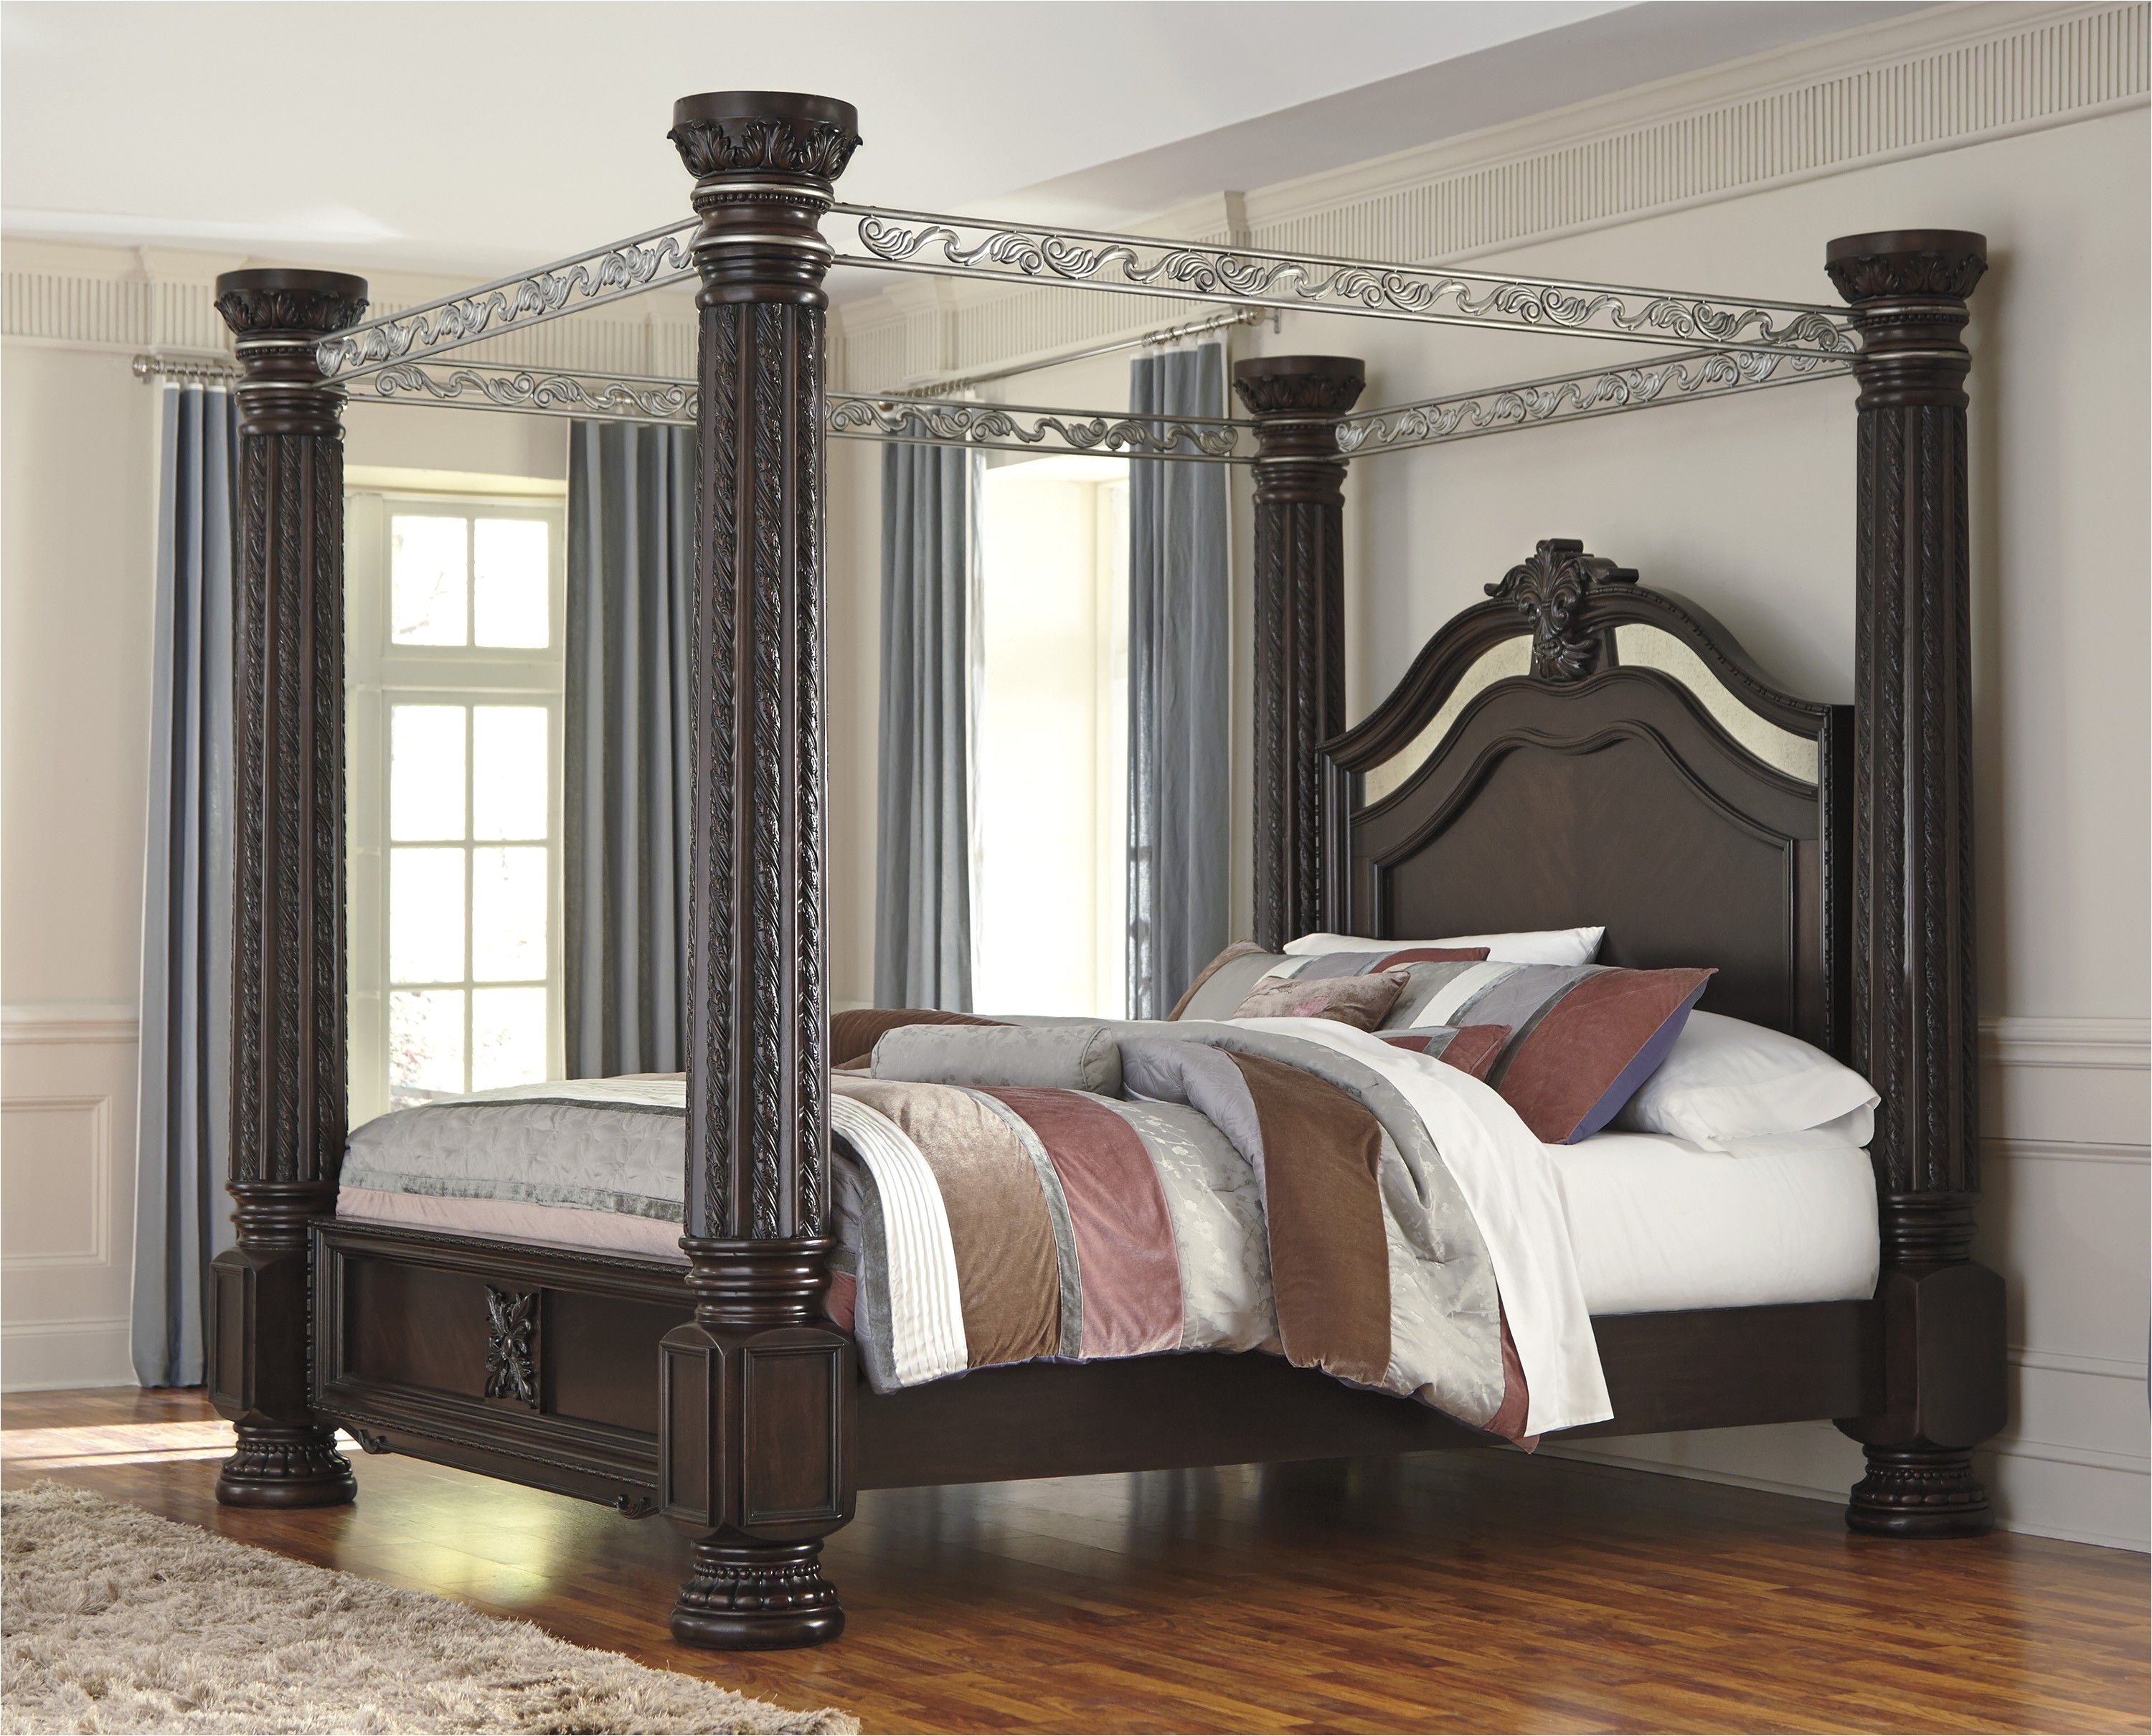 Place Gorgeous King Canopy Bed for Enchanting Bedroom with Grey Carpet Rug and Laminate Wooden Flooring